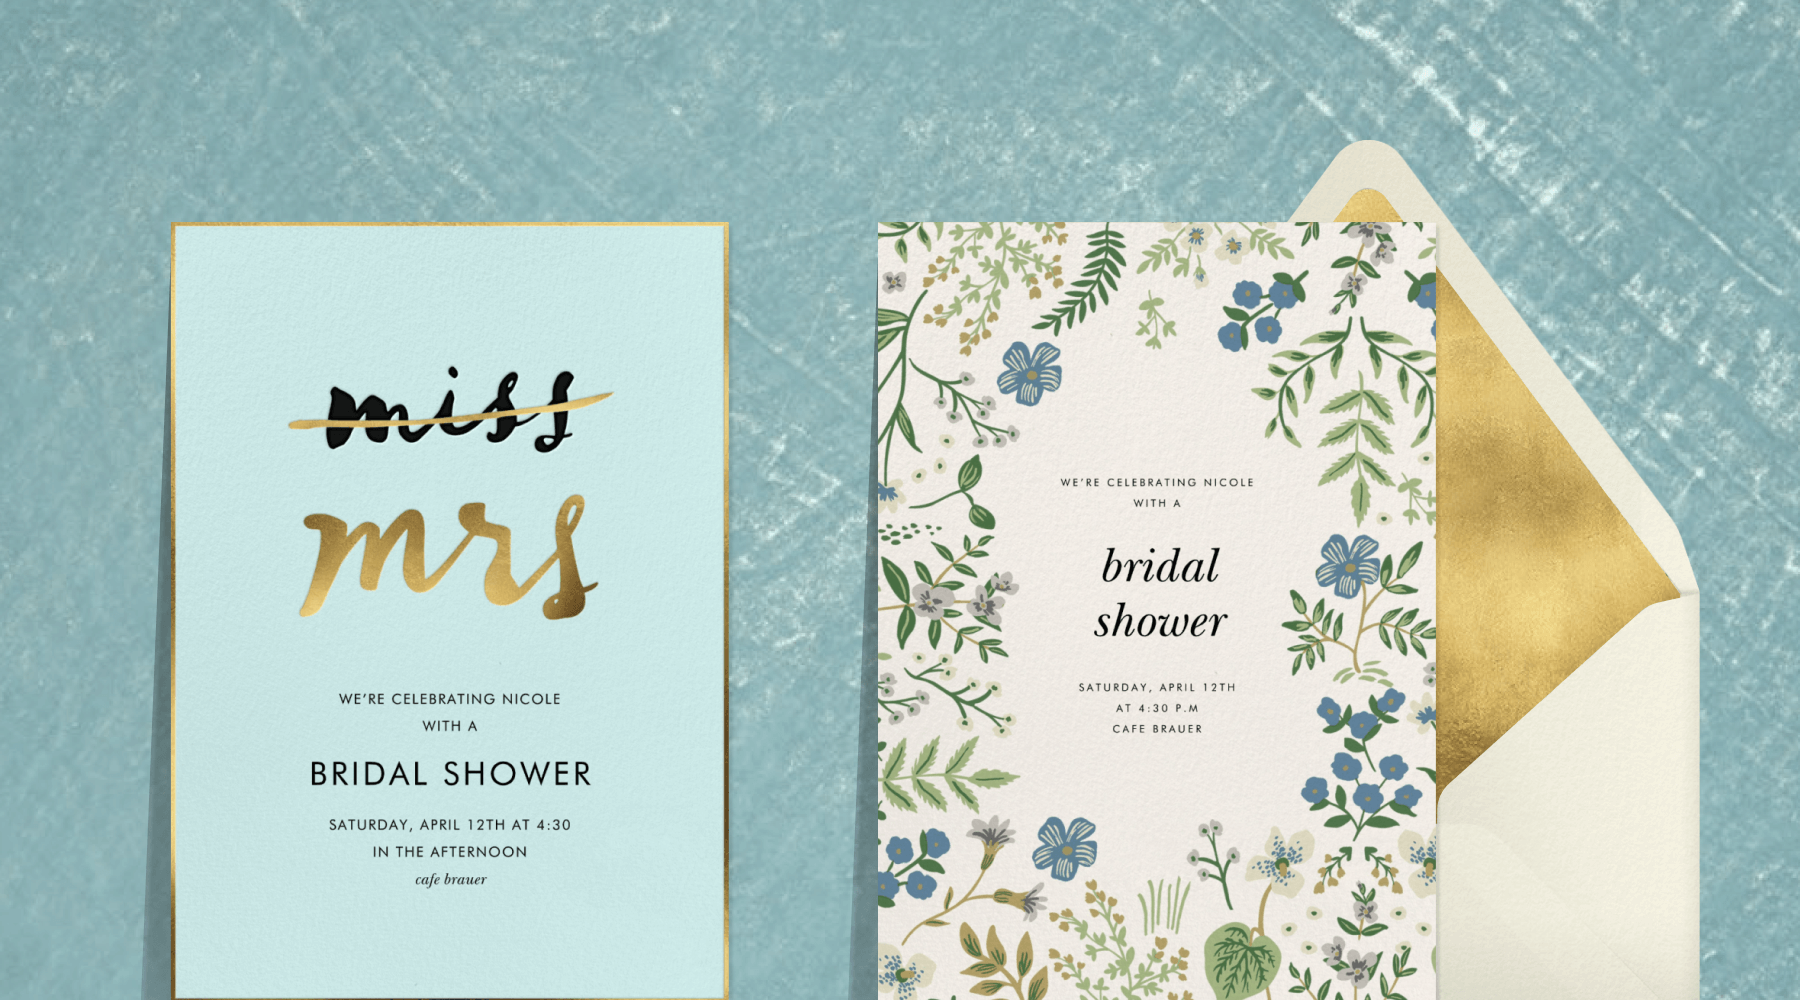 A baby blue invitation with the word ‘miss’ striked out and ‘mrs’ underneath in gold script; an invitation with a border of blue and green florals and plants next to a cream and gold envelope